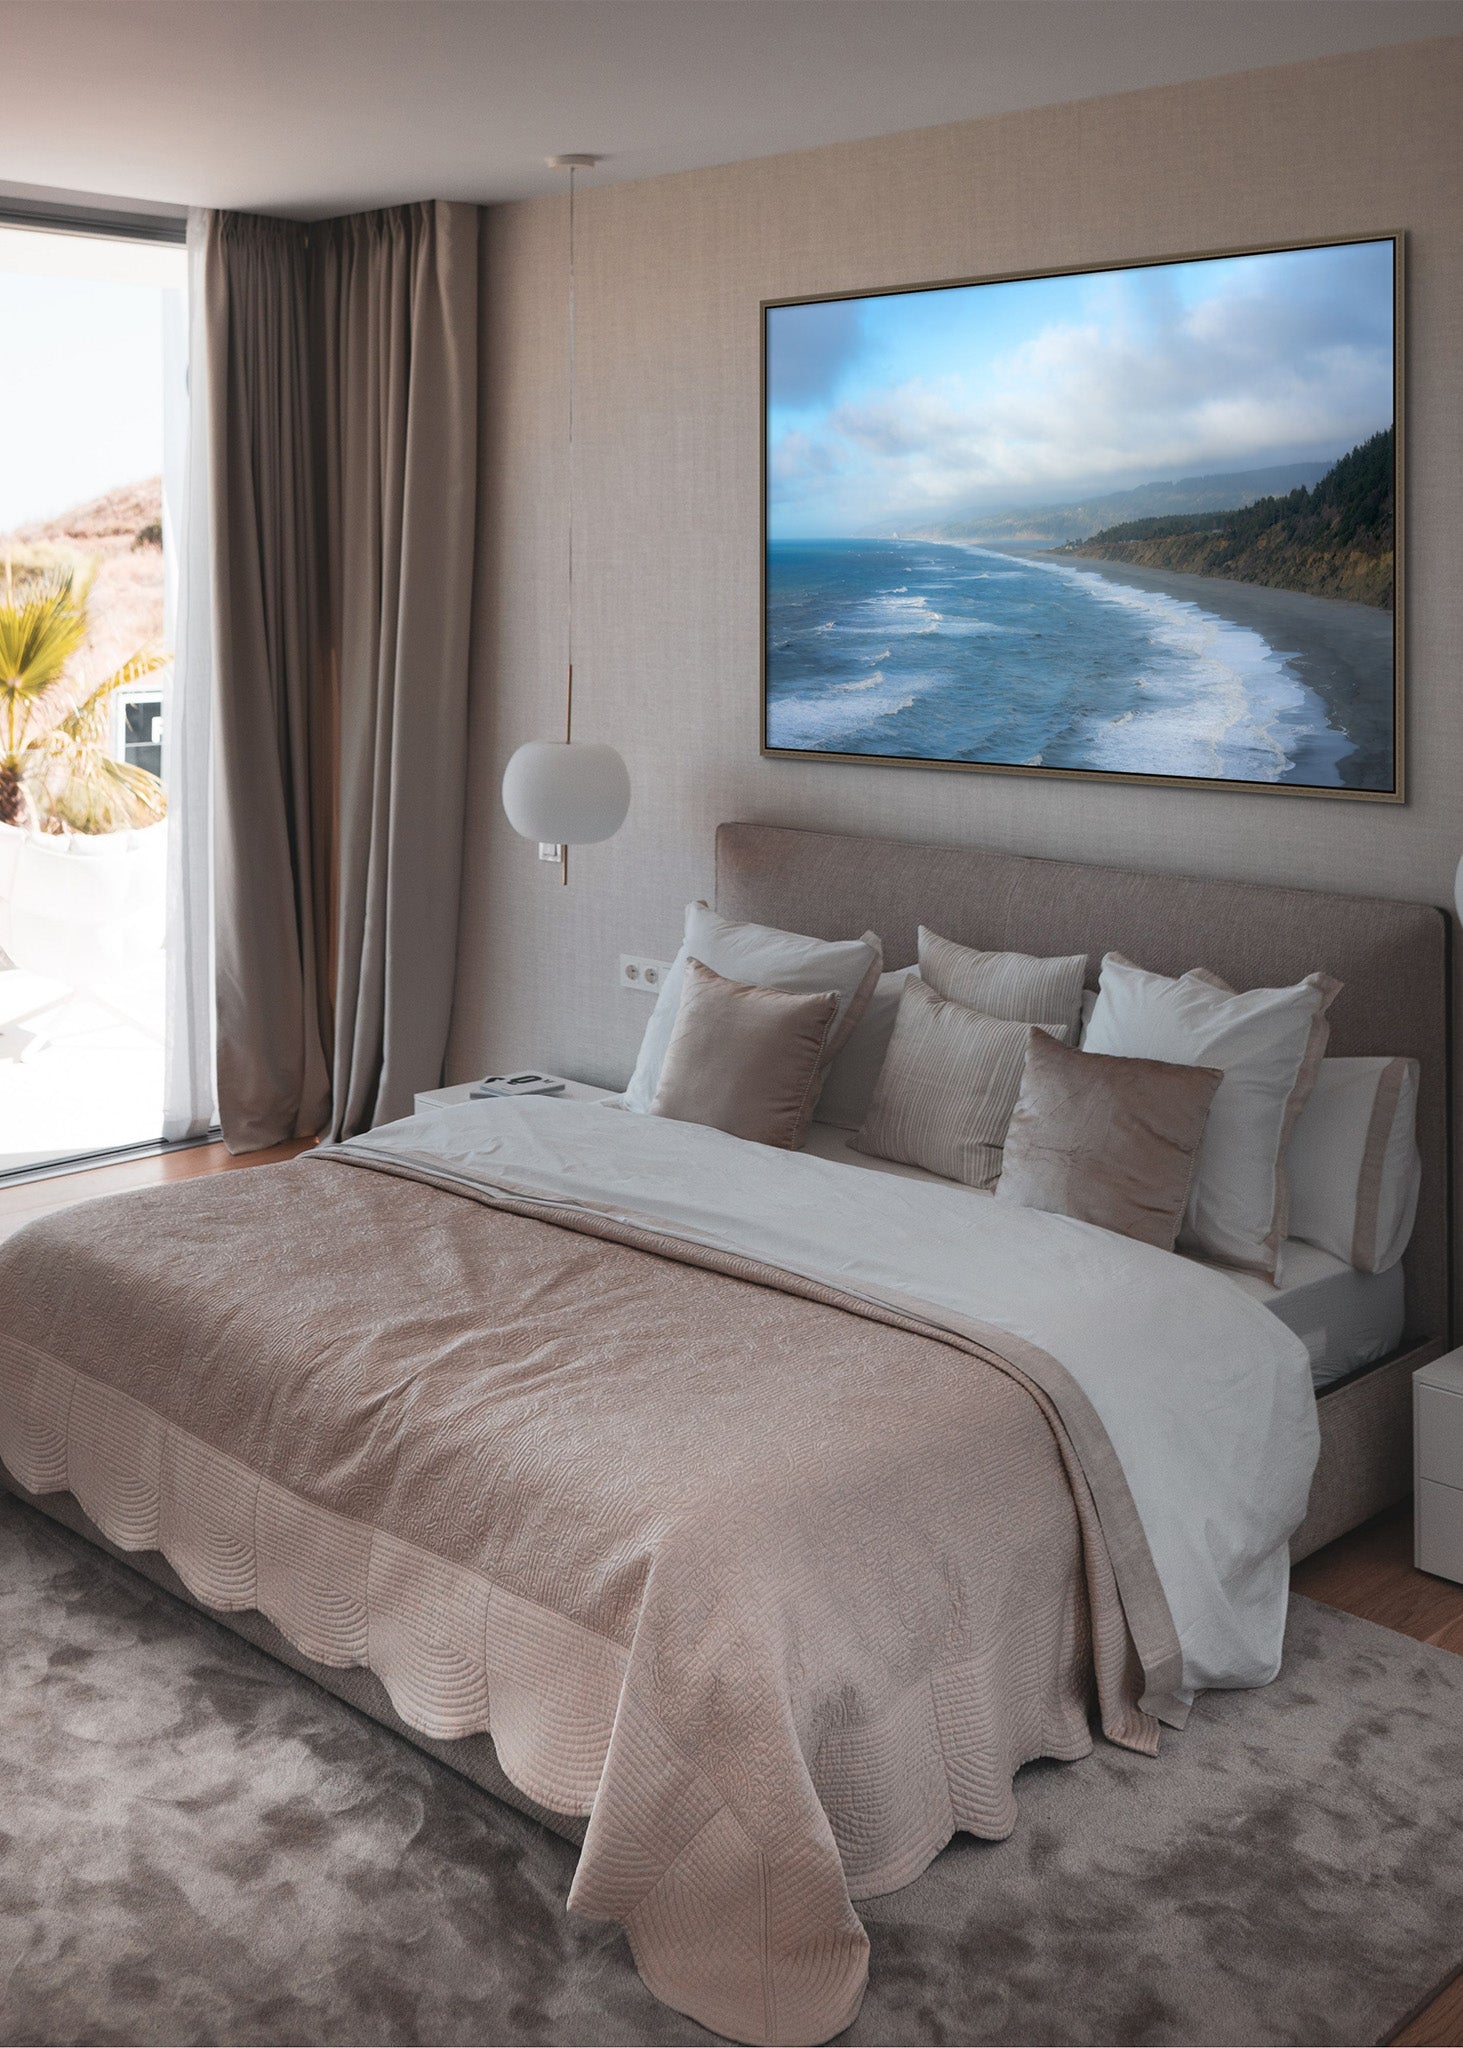 Picture hanging on the wall of a bedroom. The picture is a fine art landscape photograph titled "Coastal Tide" by Cameron Dreaux of Dreaux Fine Art.